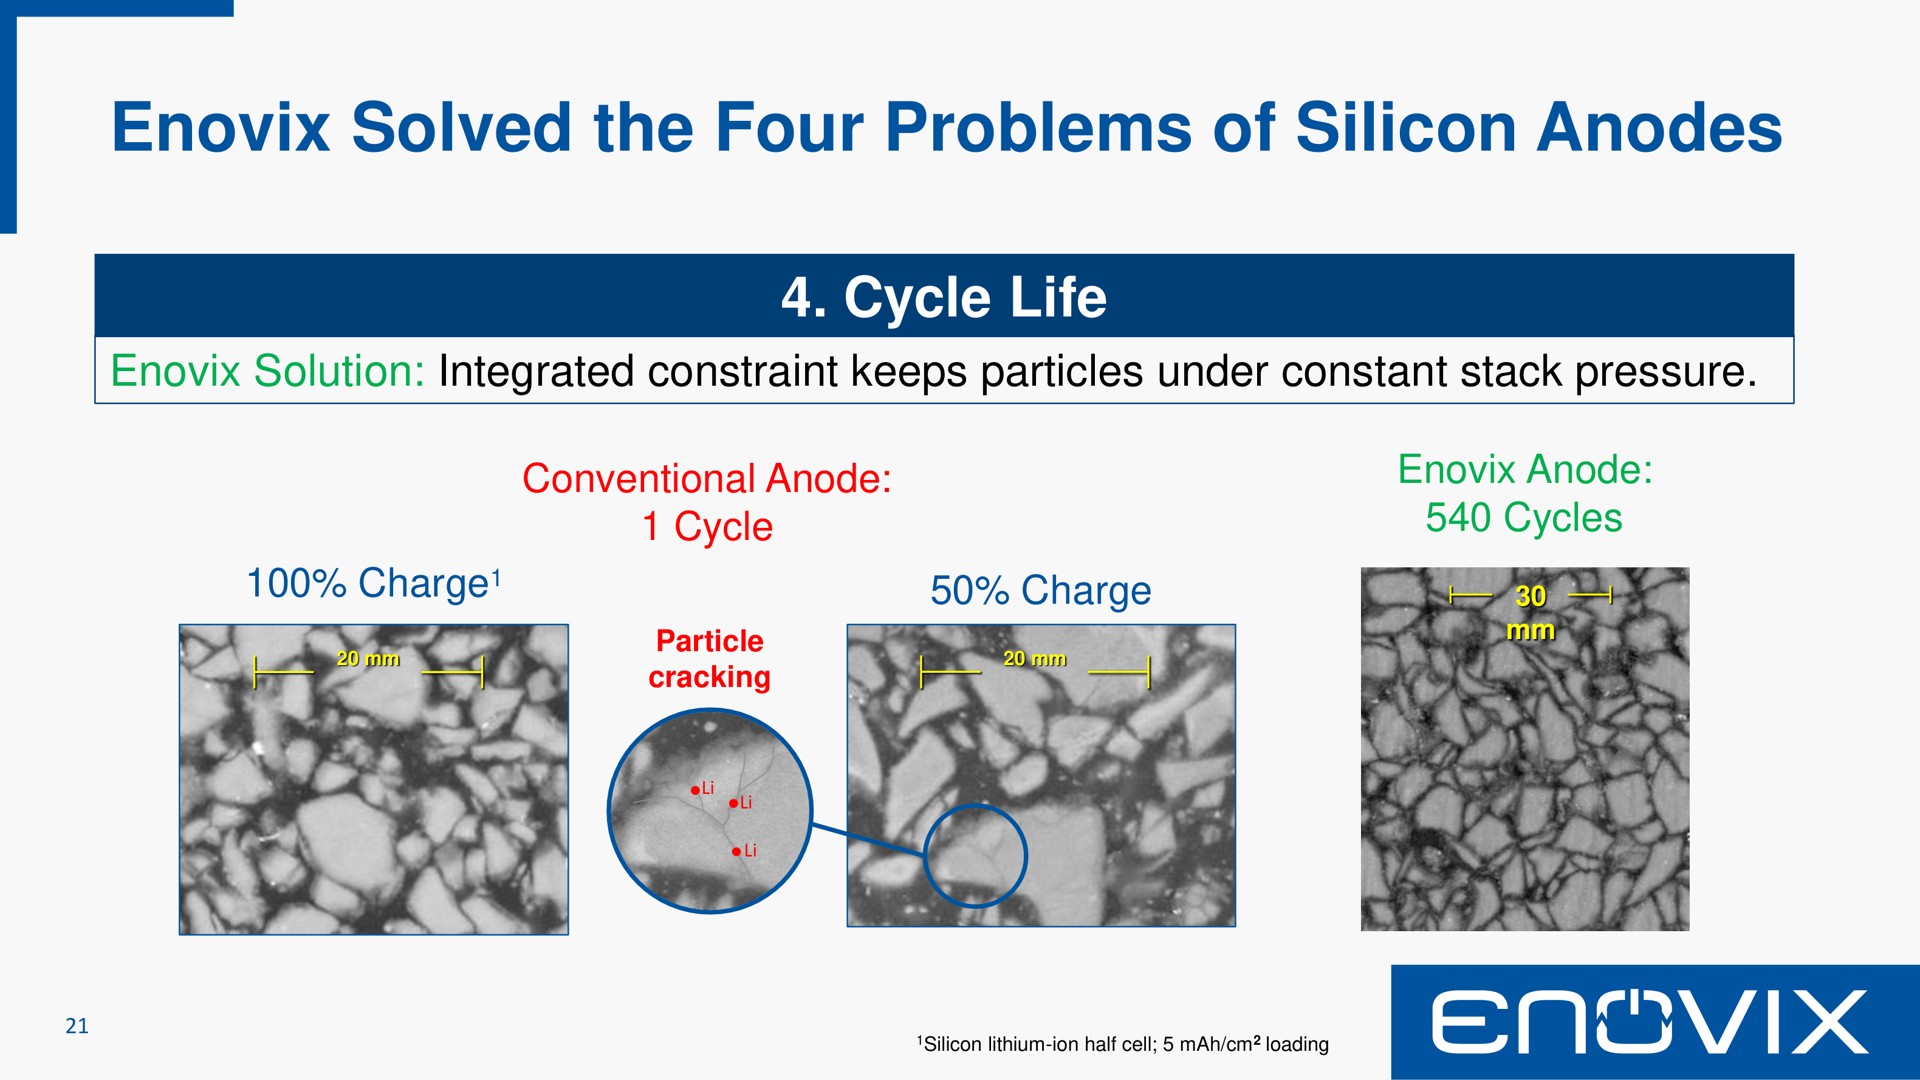 solved the four problems of silicon anodes | Enovix